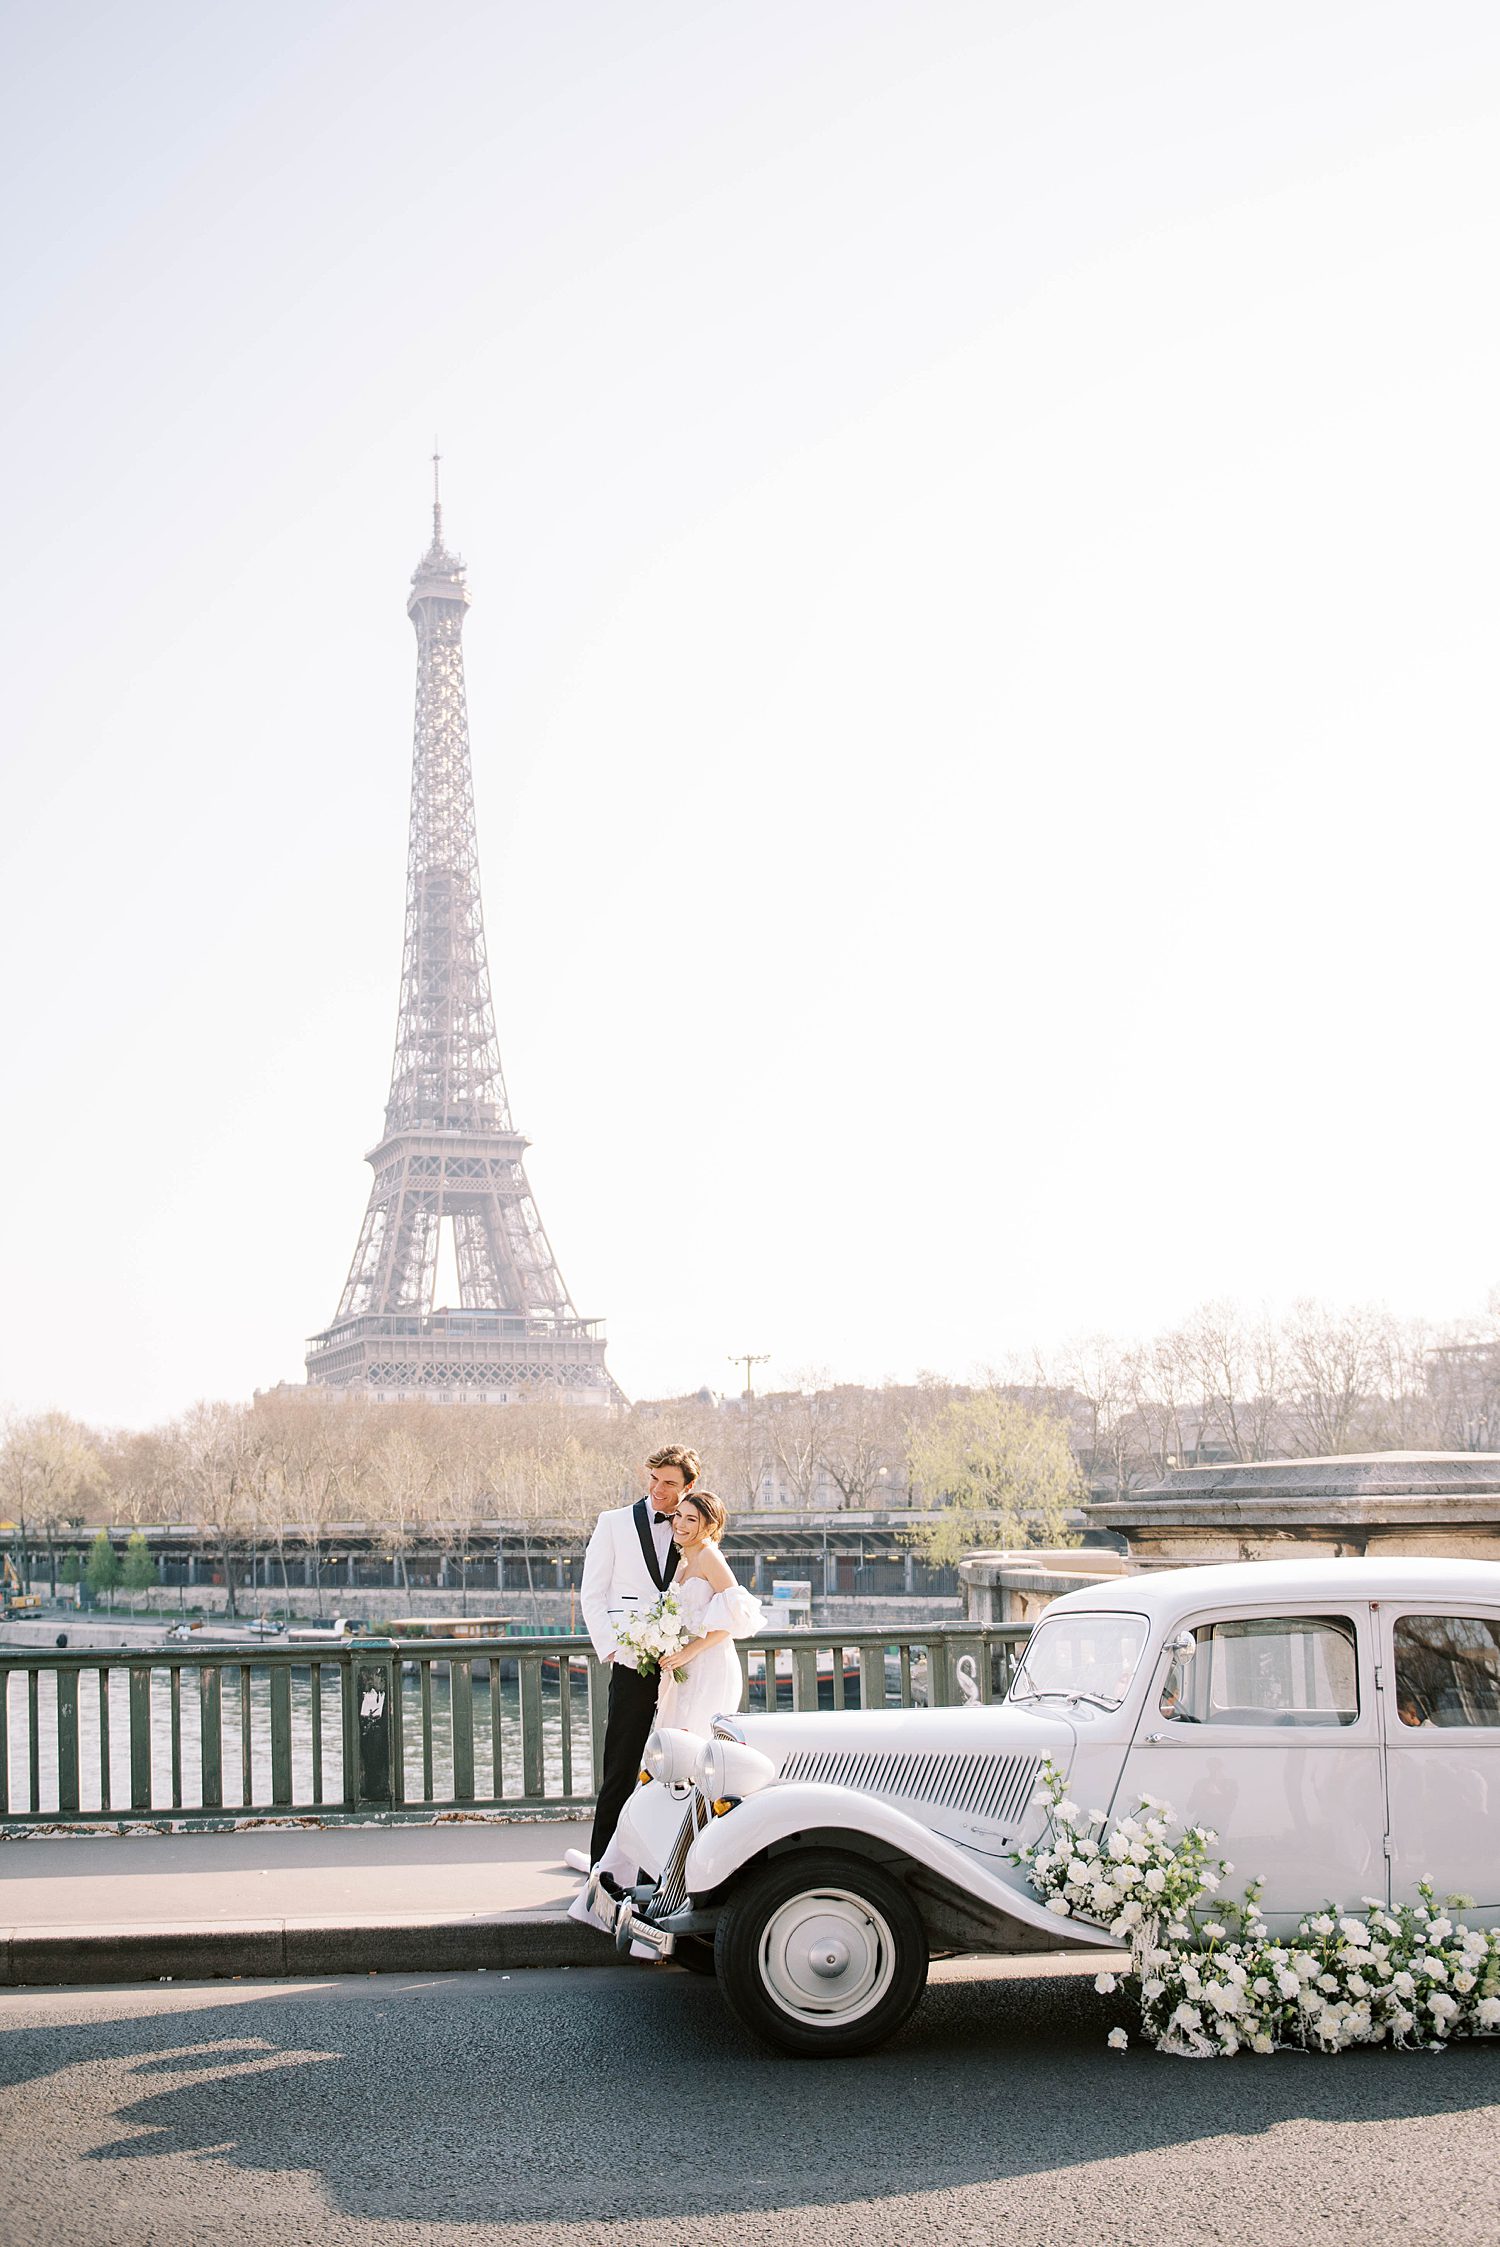 romantic Paris elopement by Eiffel Tower with classic white car next to bride and groom